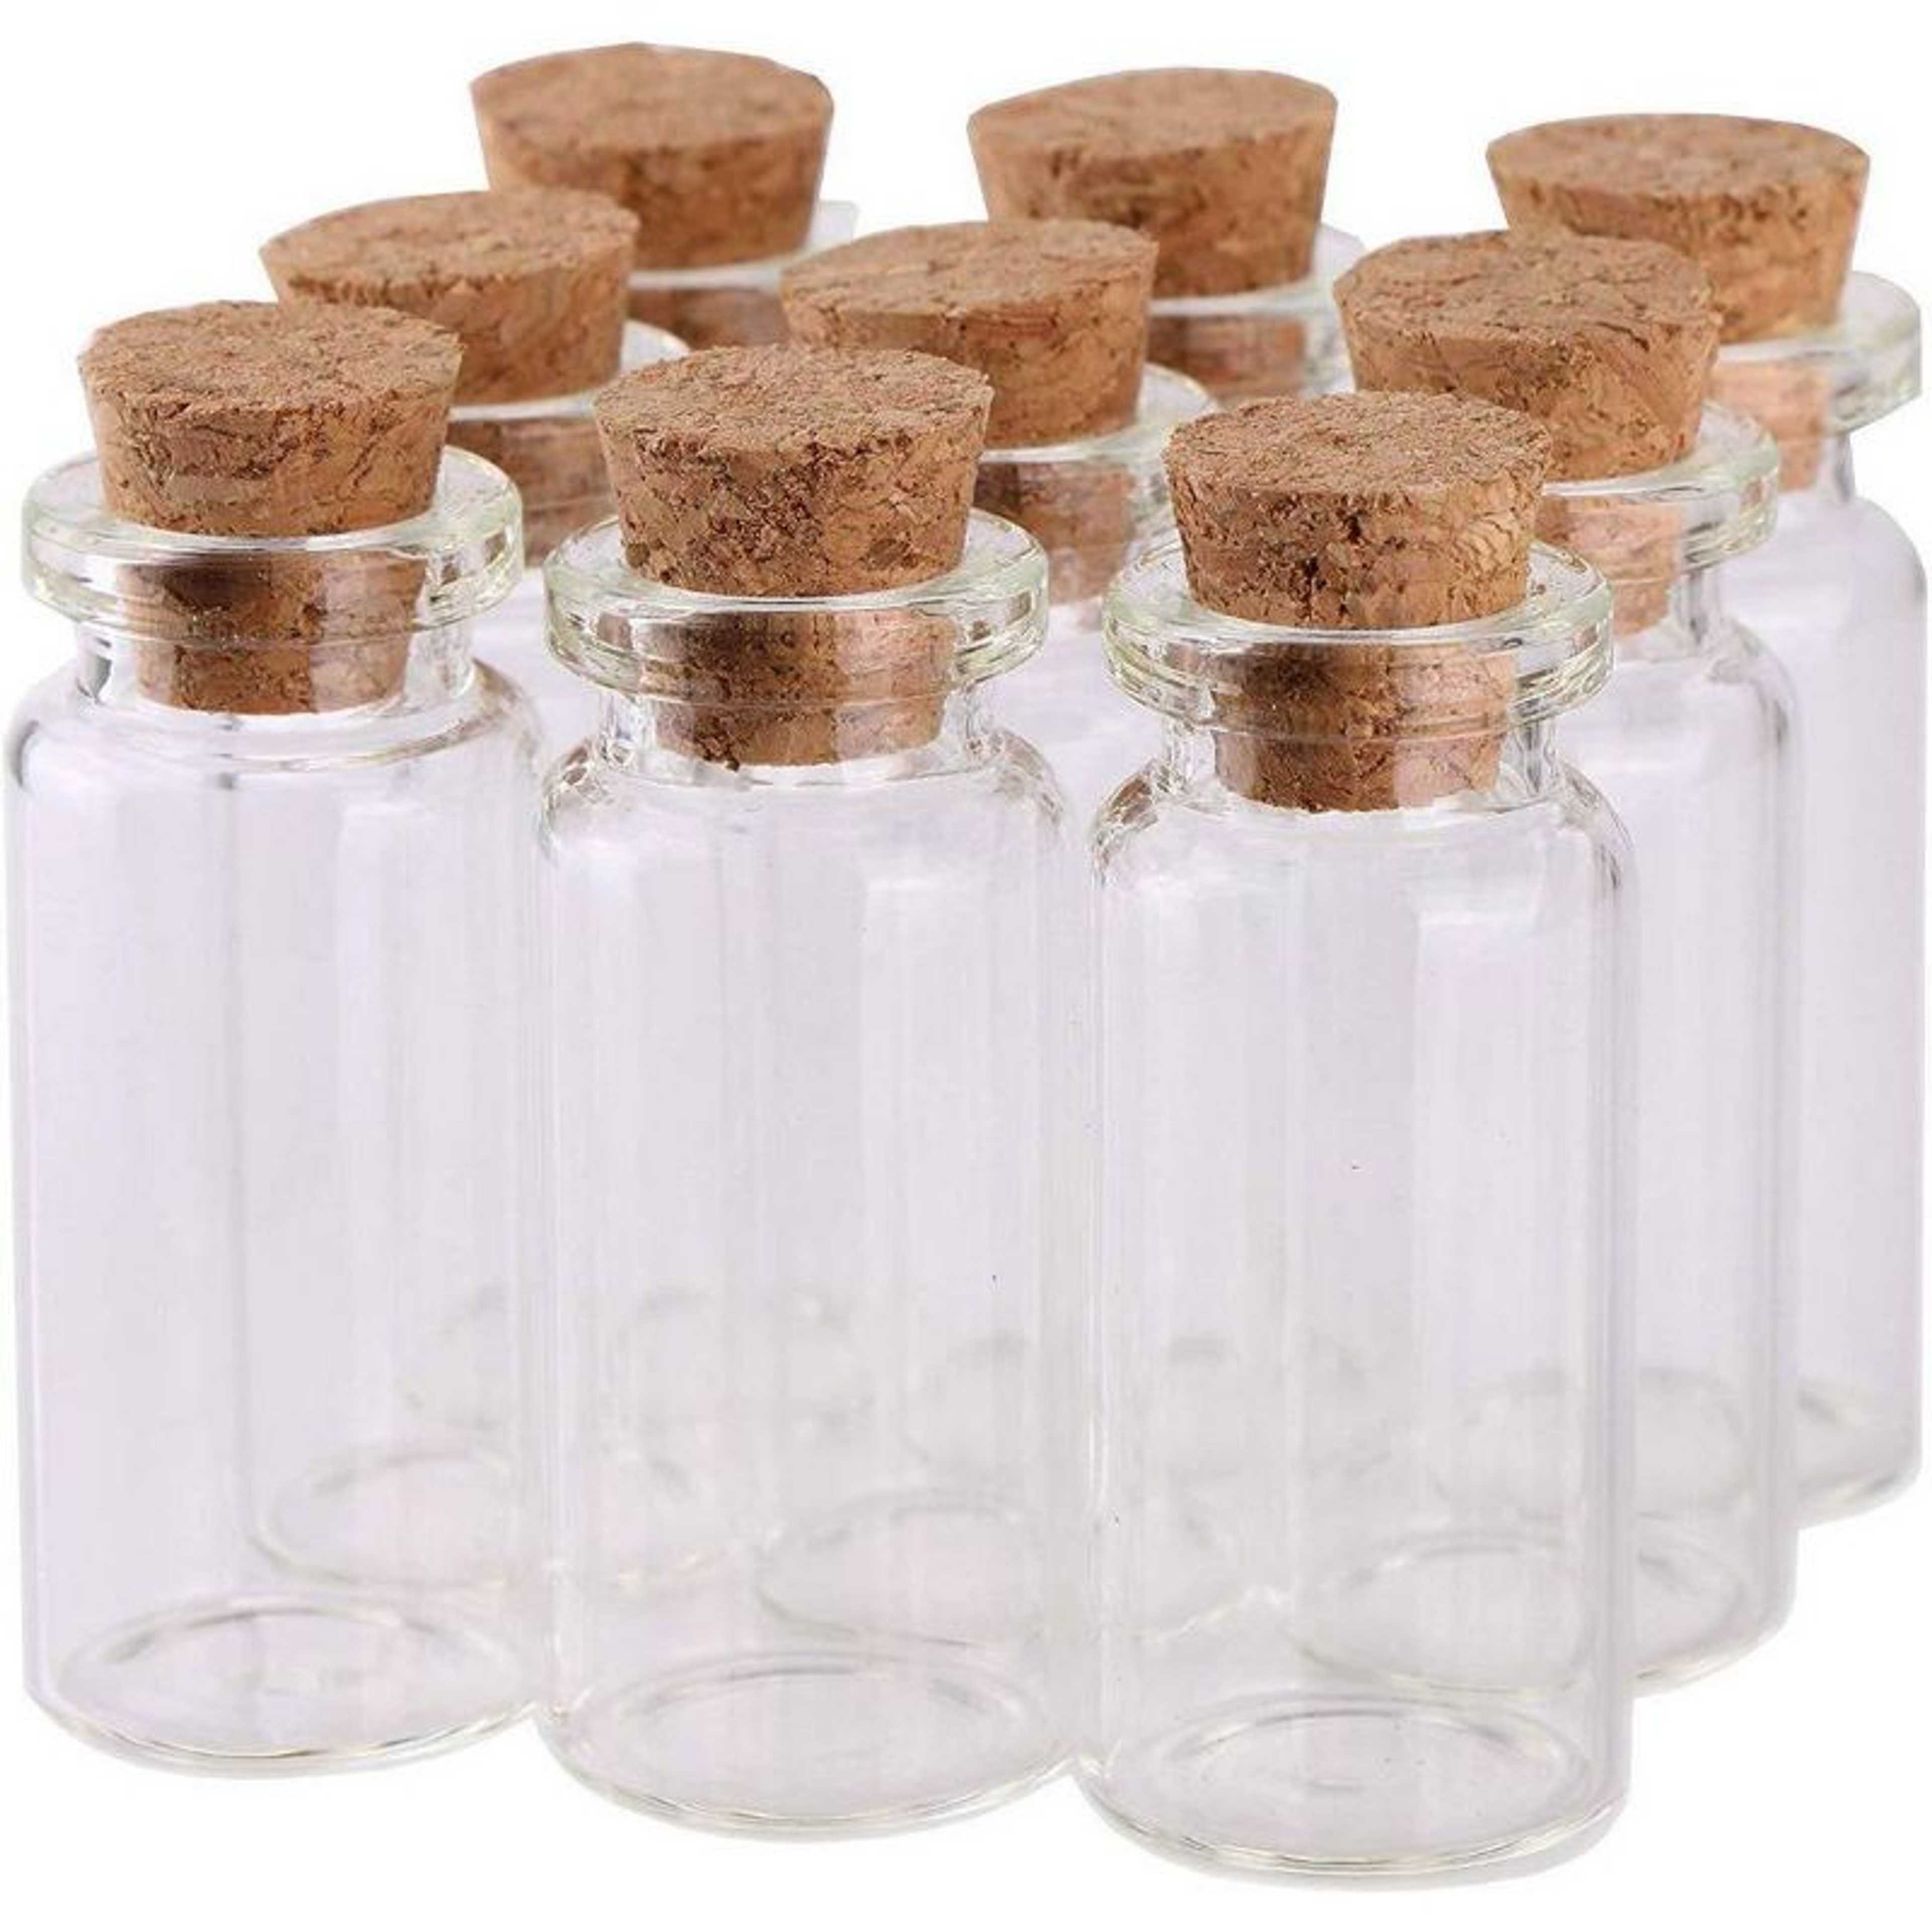 Pack of 10 - Mini Glass Bottles with Cork Stoppers for Arts & Crafts